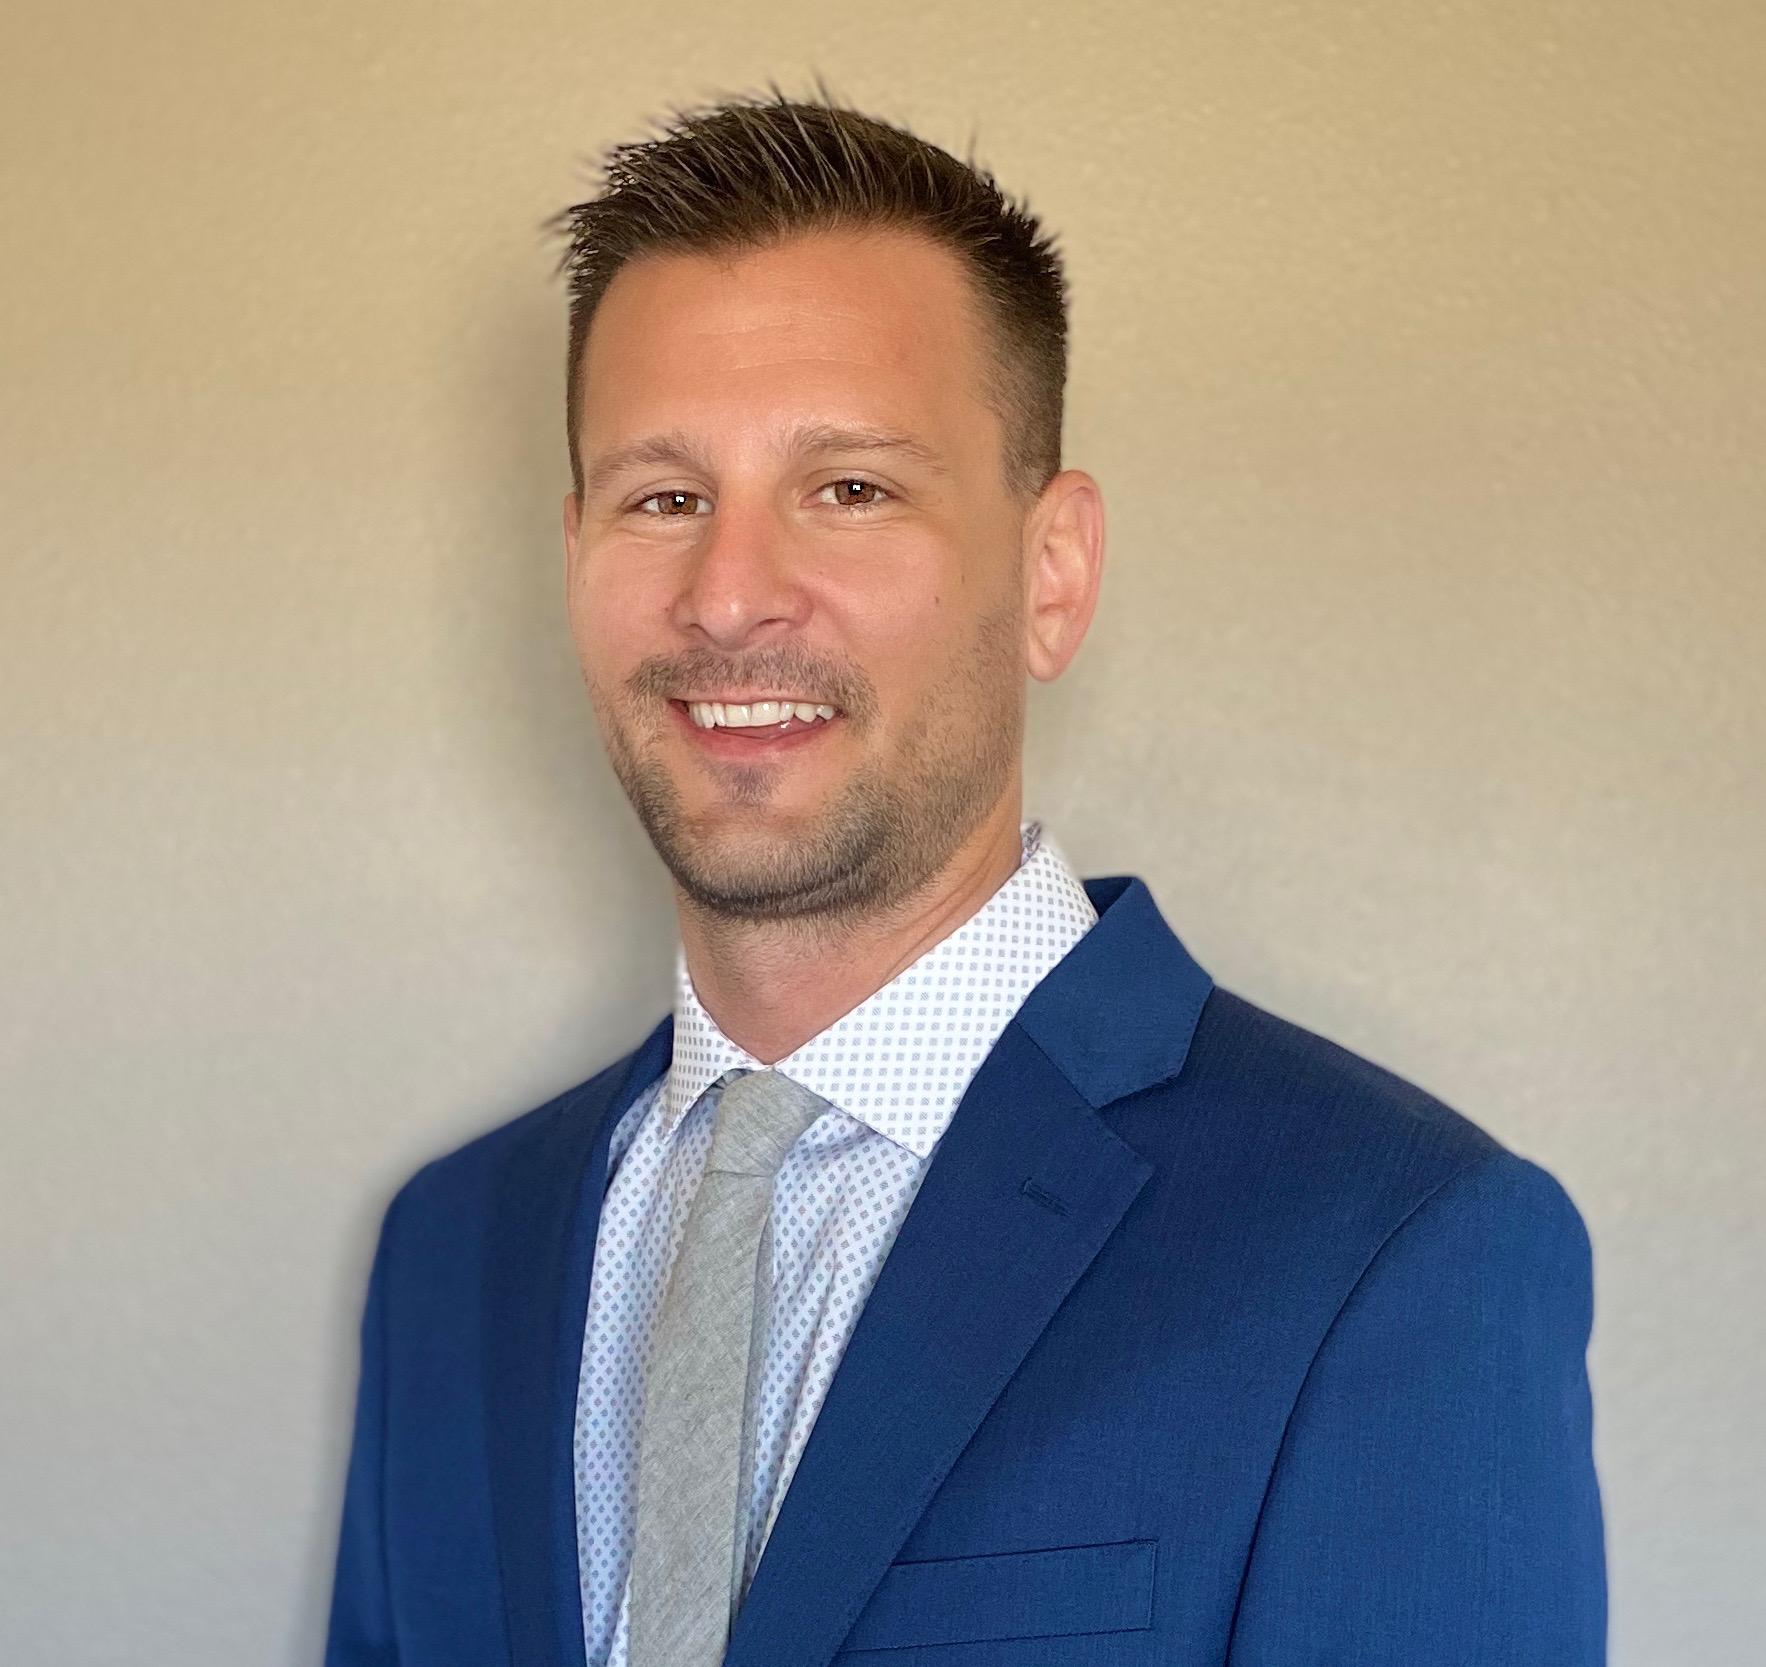 RYAN SPEIRS Financial Professional & Insurance Agent